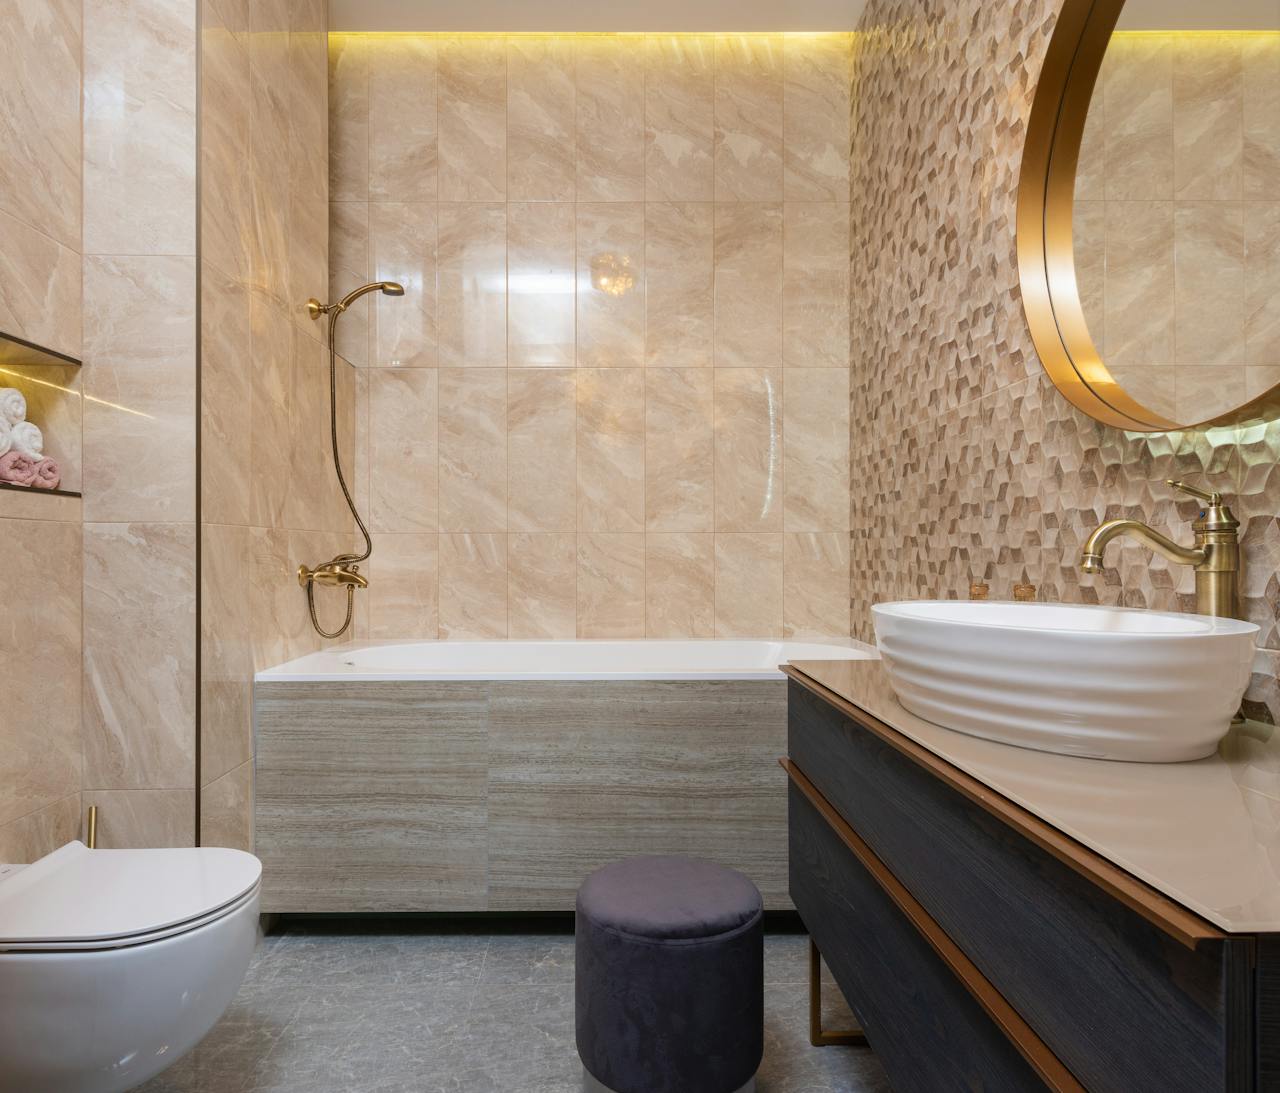 Contemporary bathroom with toilet bowl against washbasin on cabinet under mirror reflecting tiled wall in hotel